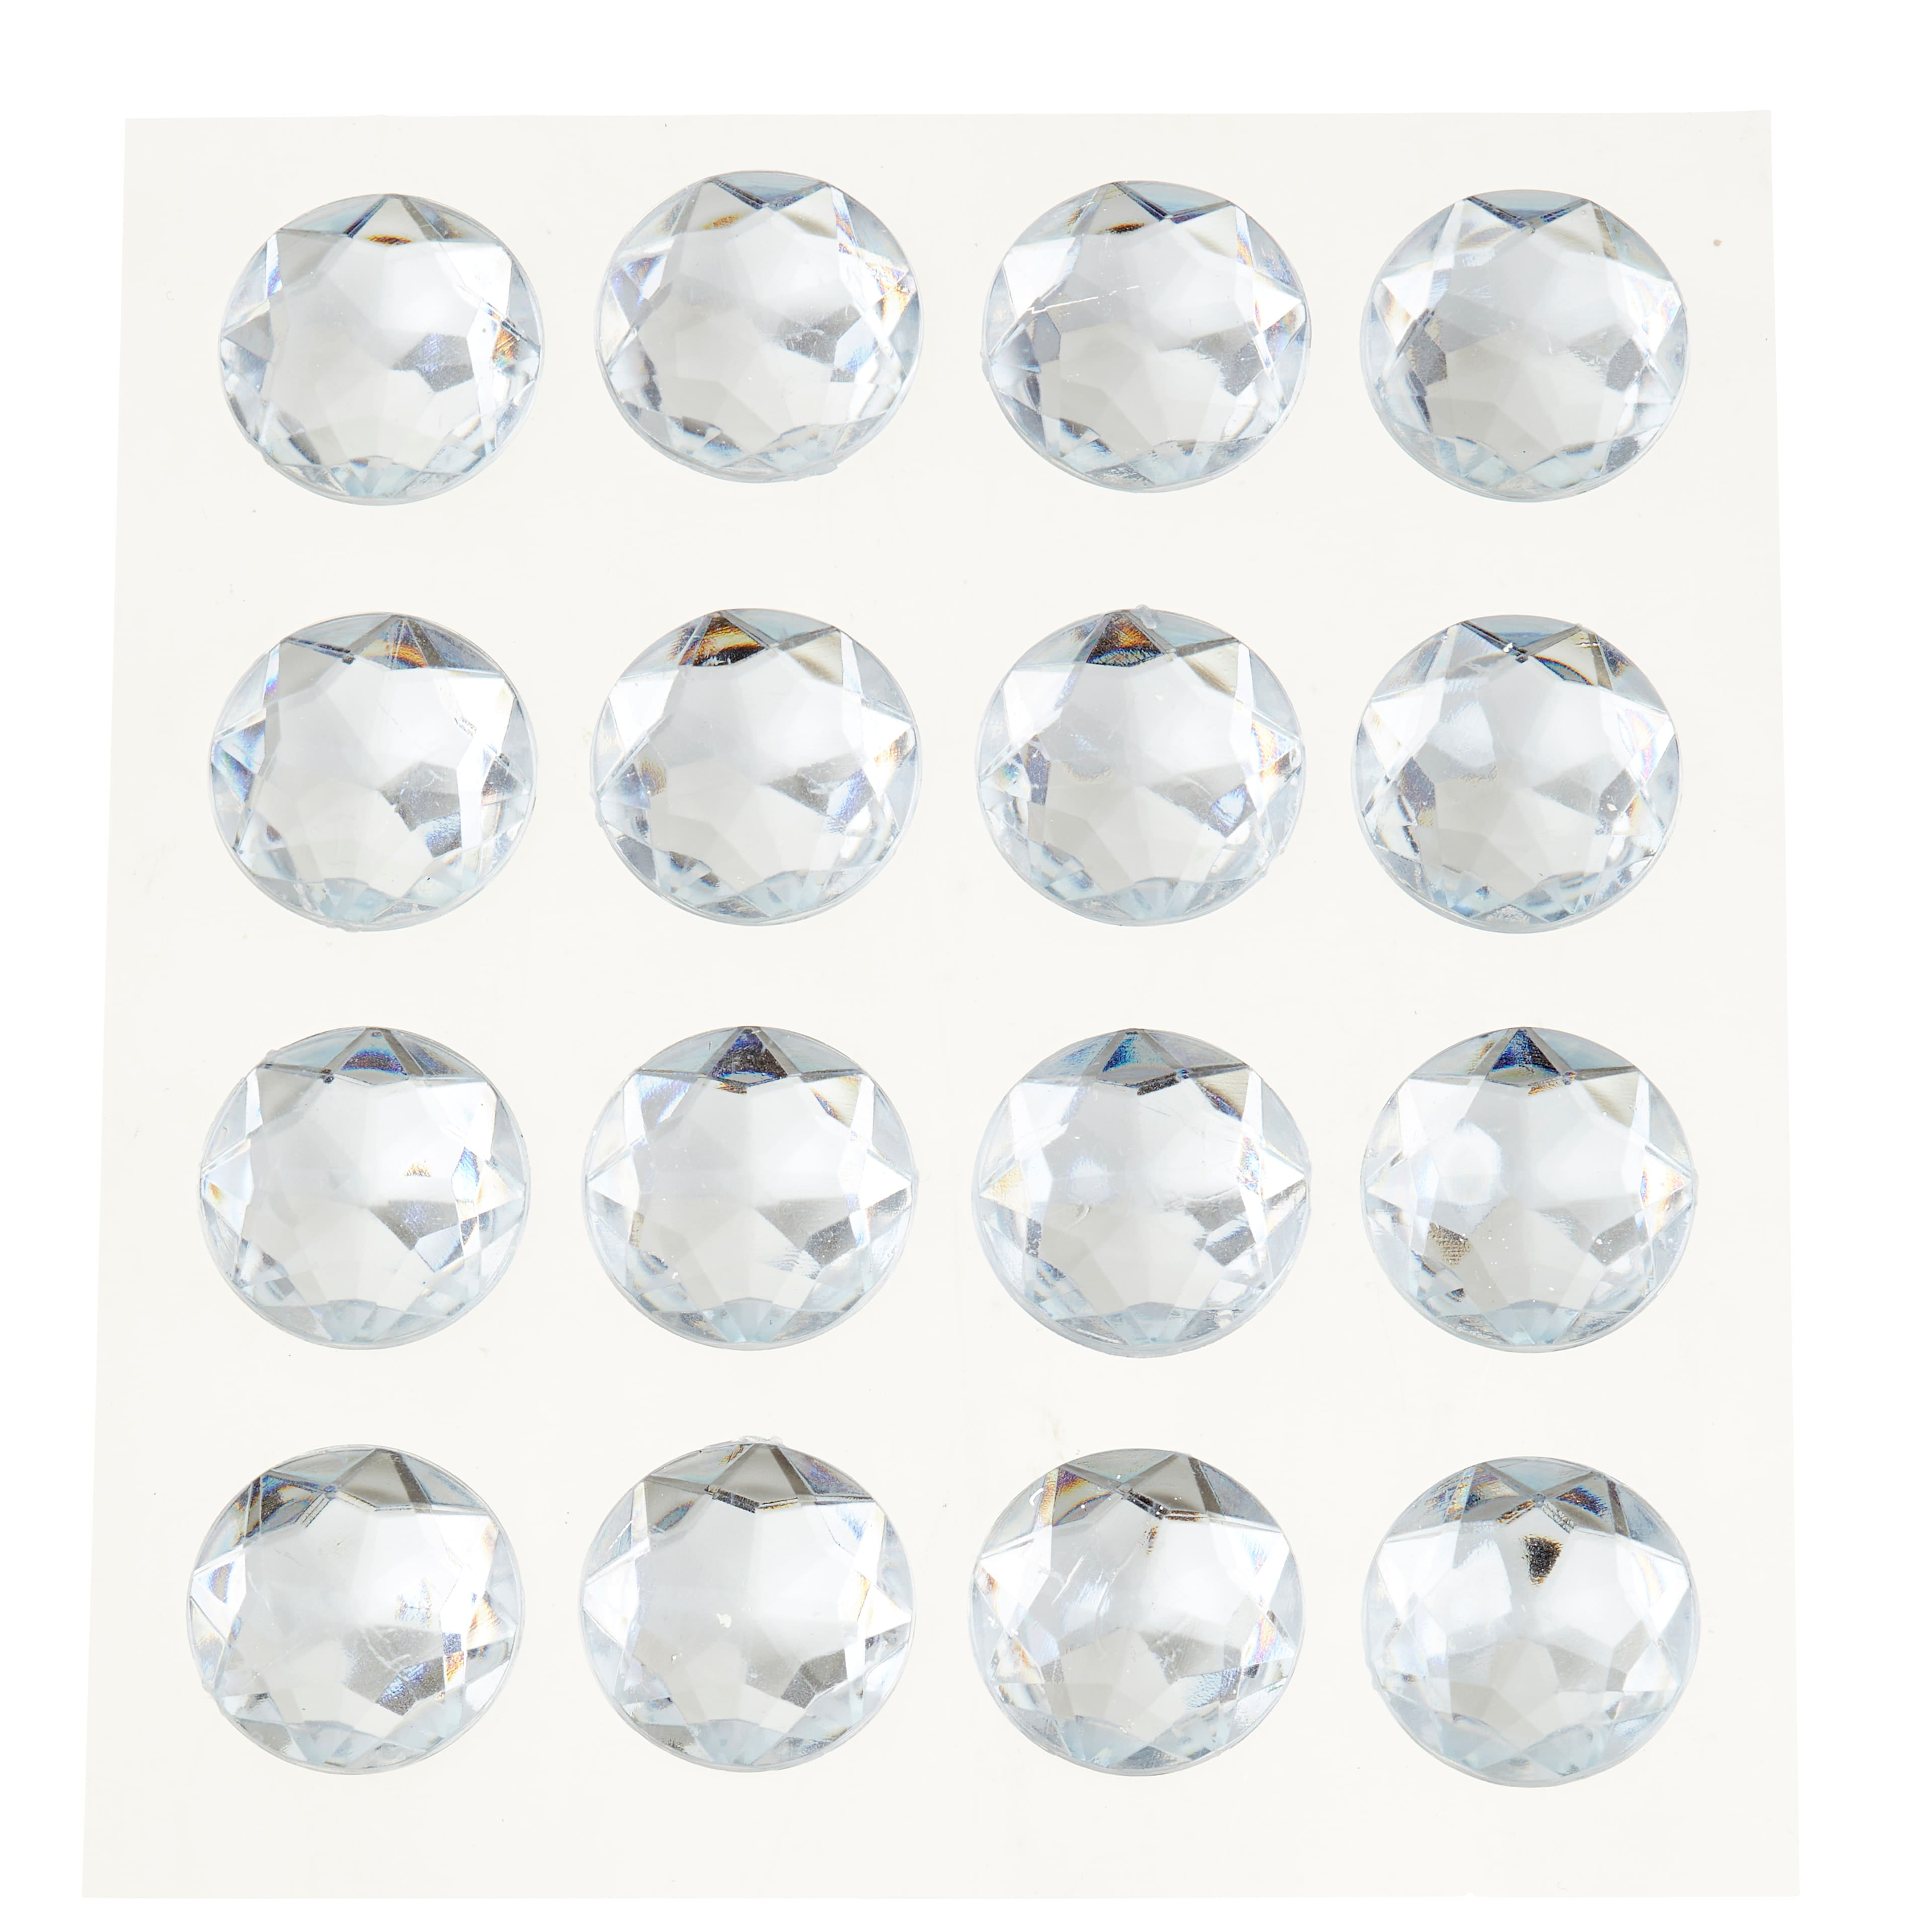 3mm Clear Adhesive Rhinestones by Recollections™